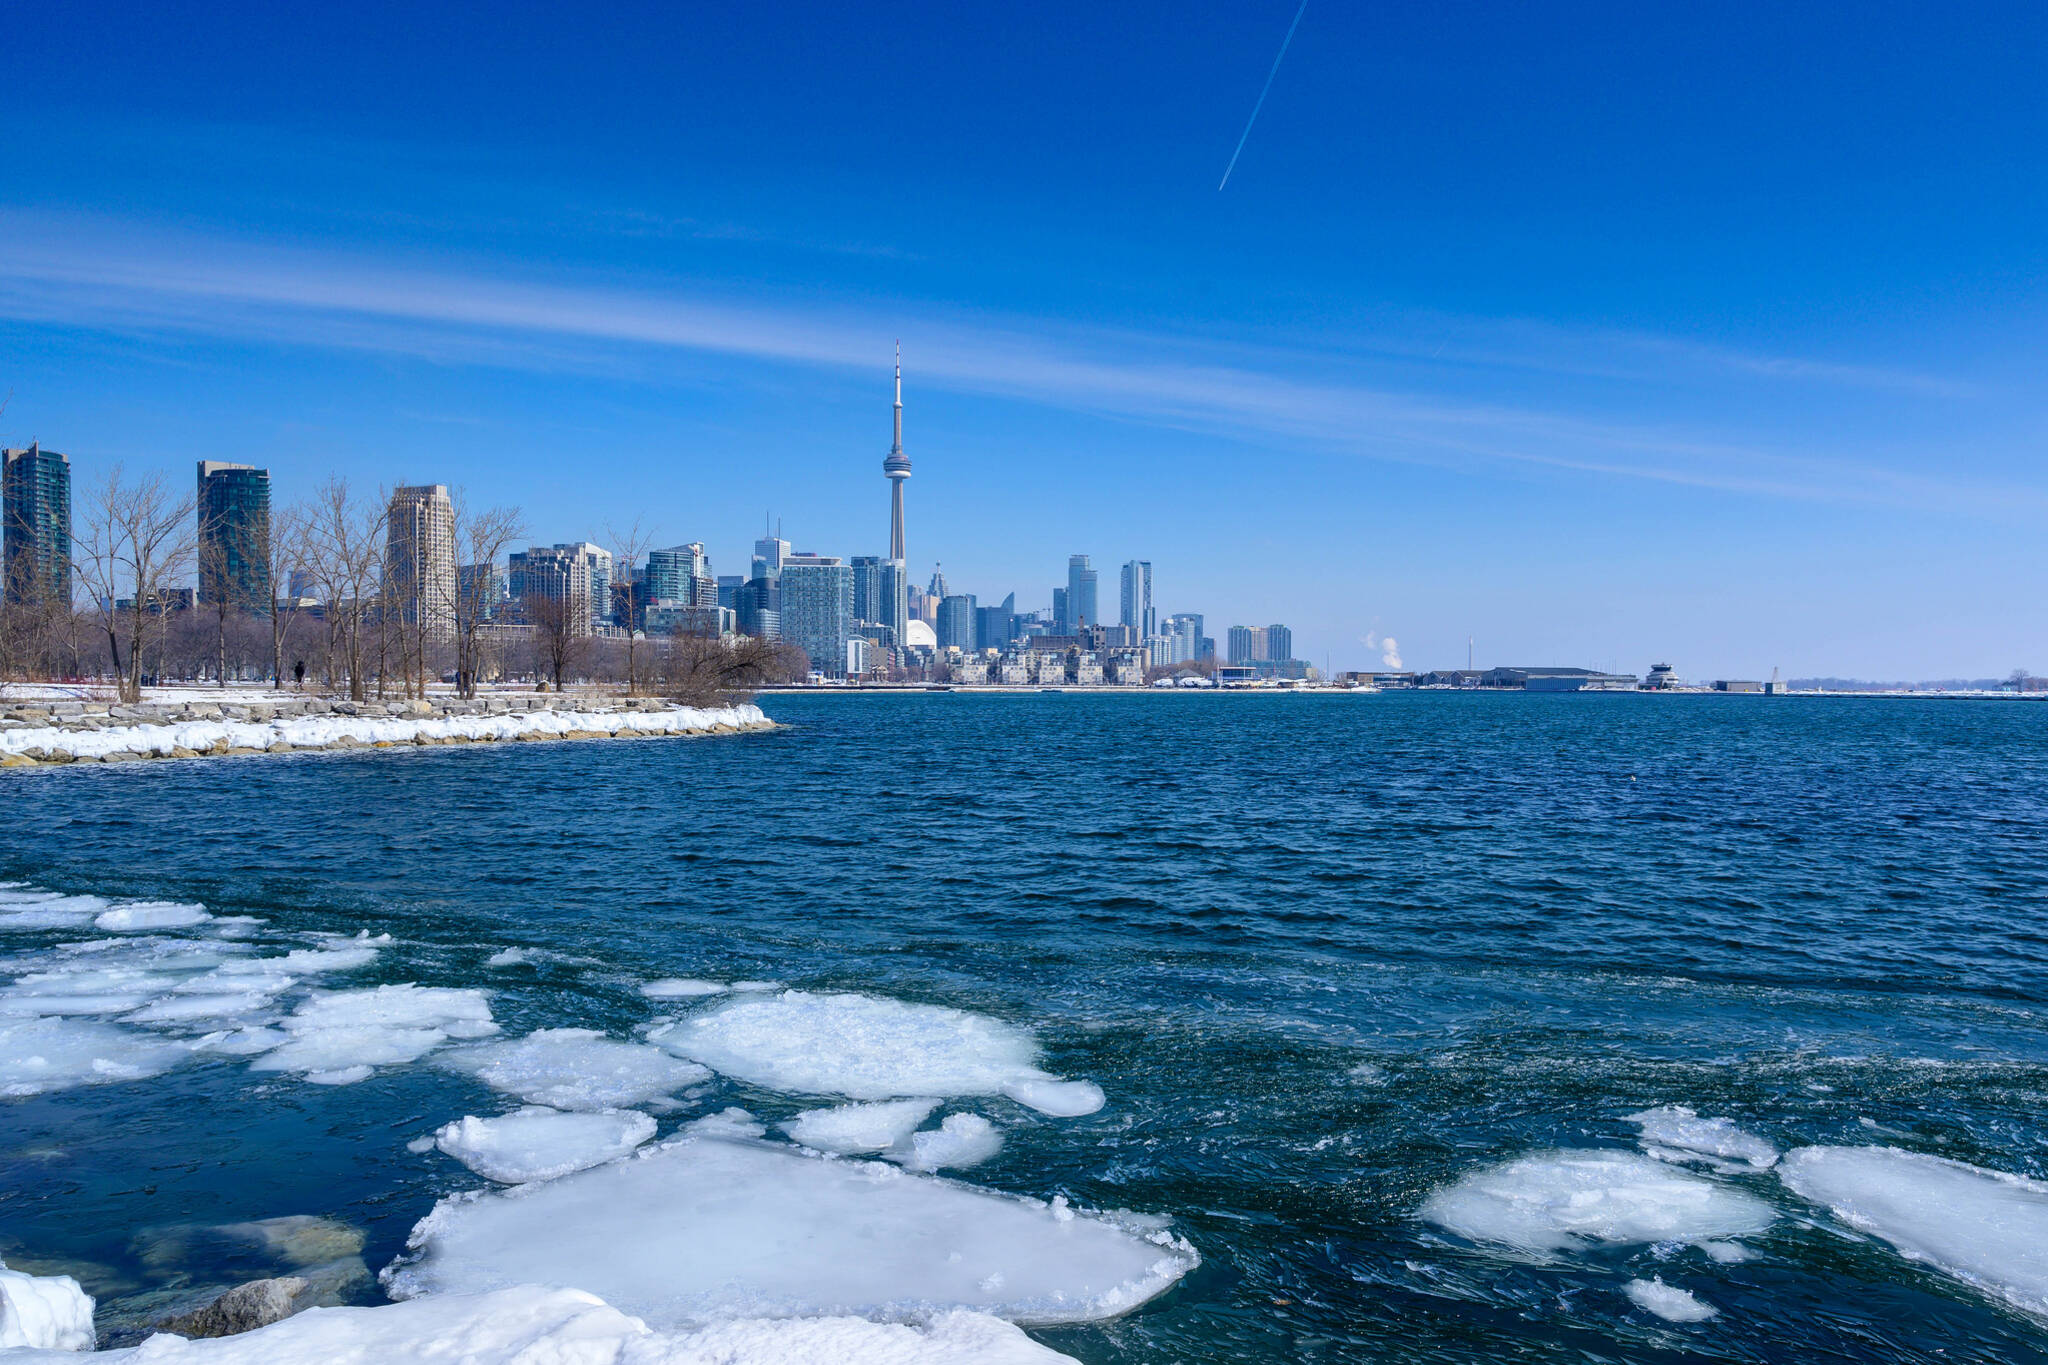 Temperatures in Toronto could reach double digits this week